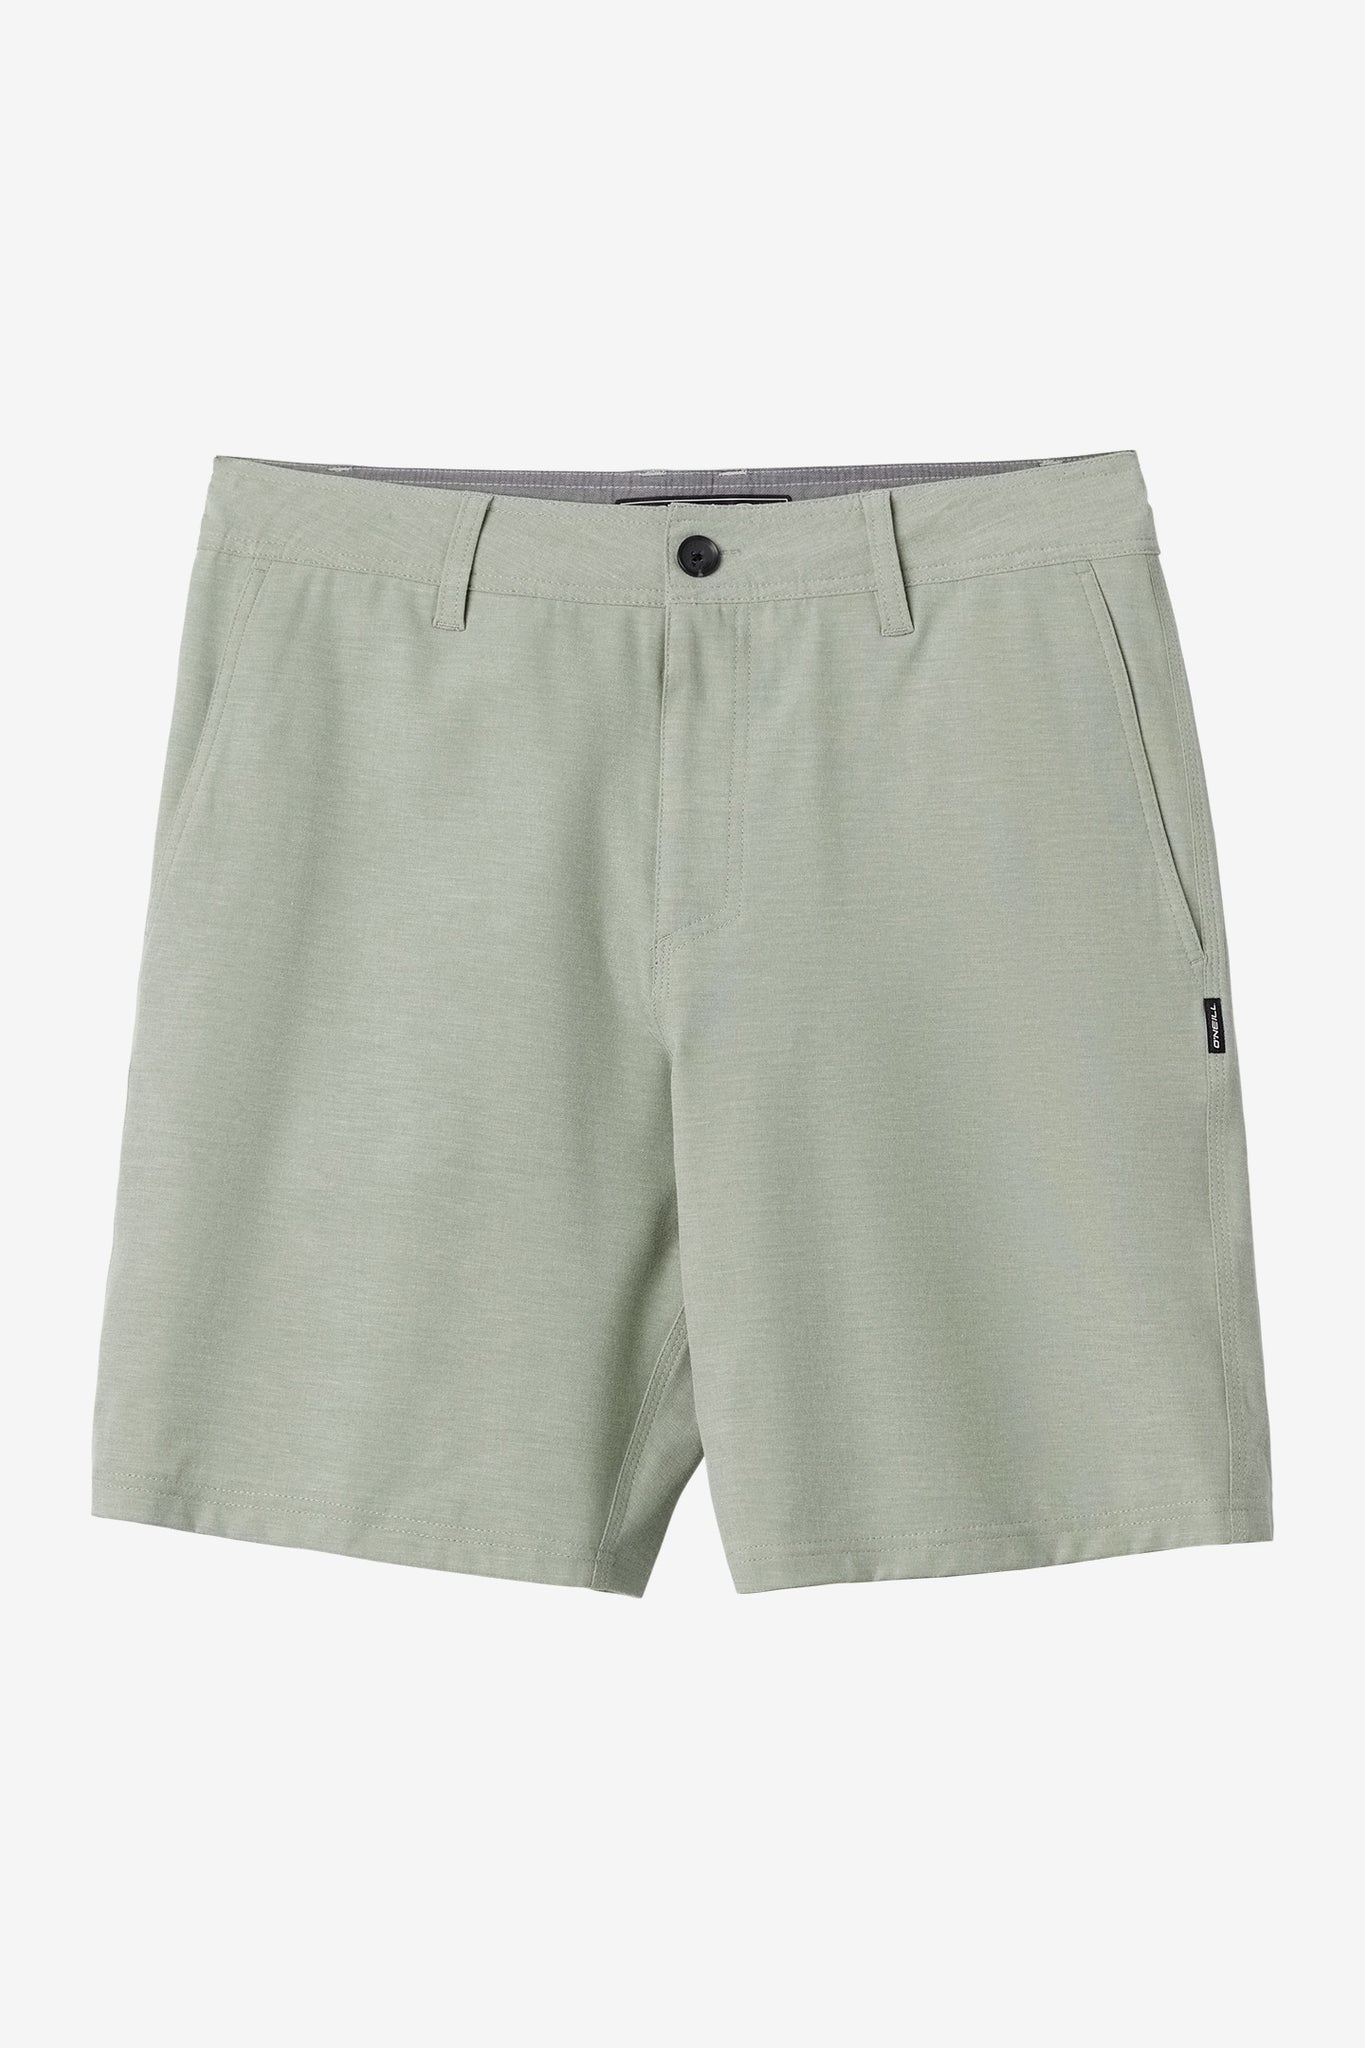 PSK Collective Solid Gray Green Athletic Shorts Size 3X (Plus) - 62% off